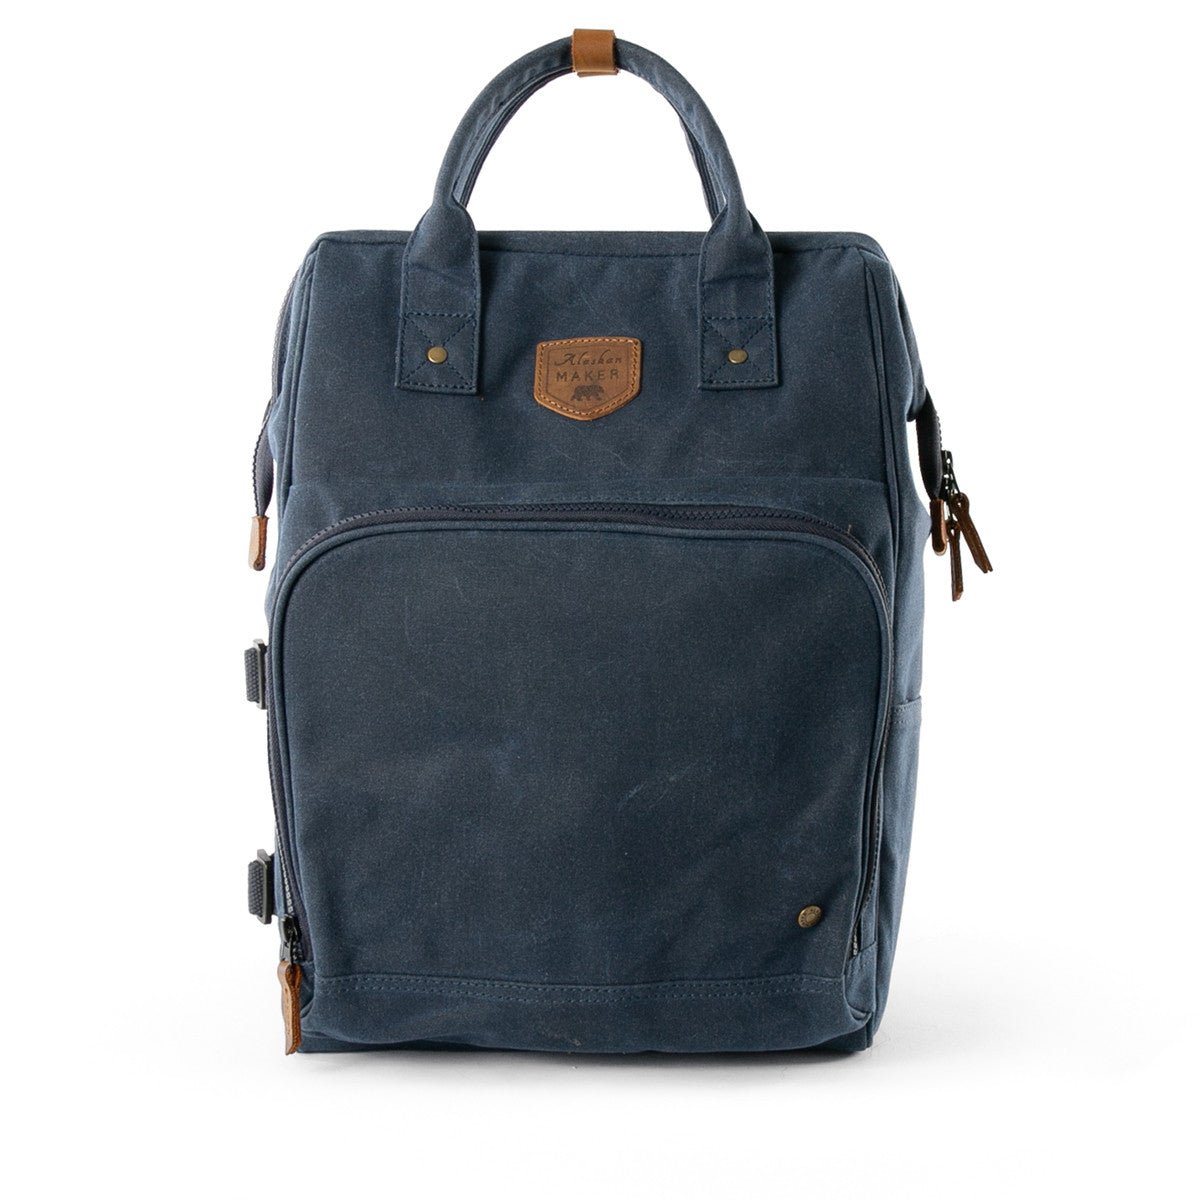 Waxed Canvas Picnic Backpack Cooler - Life of Riley